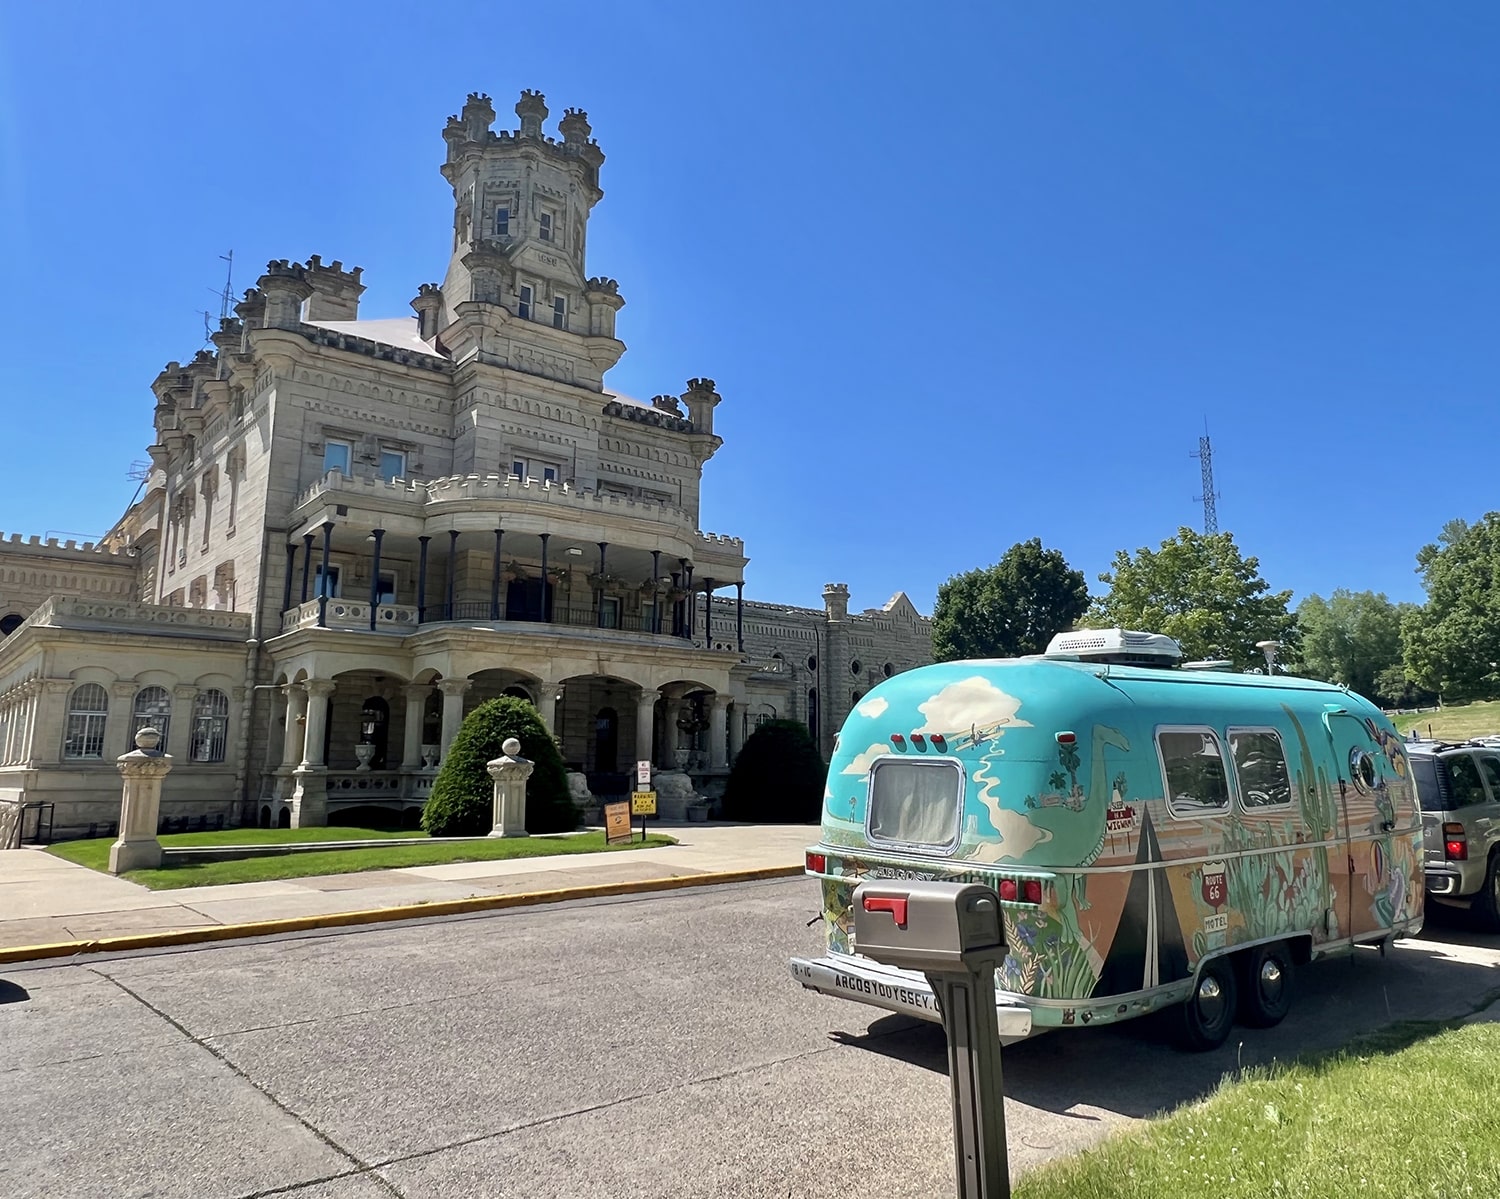 Colorful Airstream trailer parked in front of gothic building.